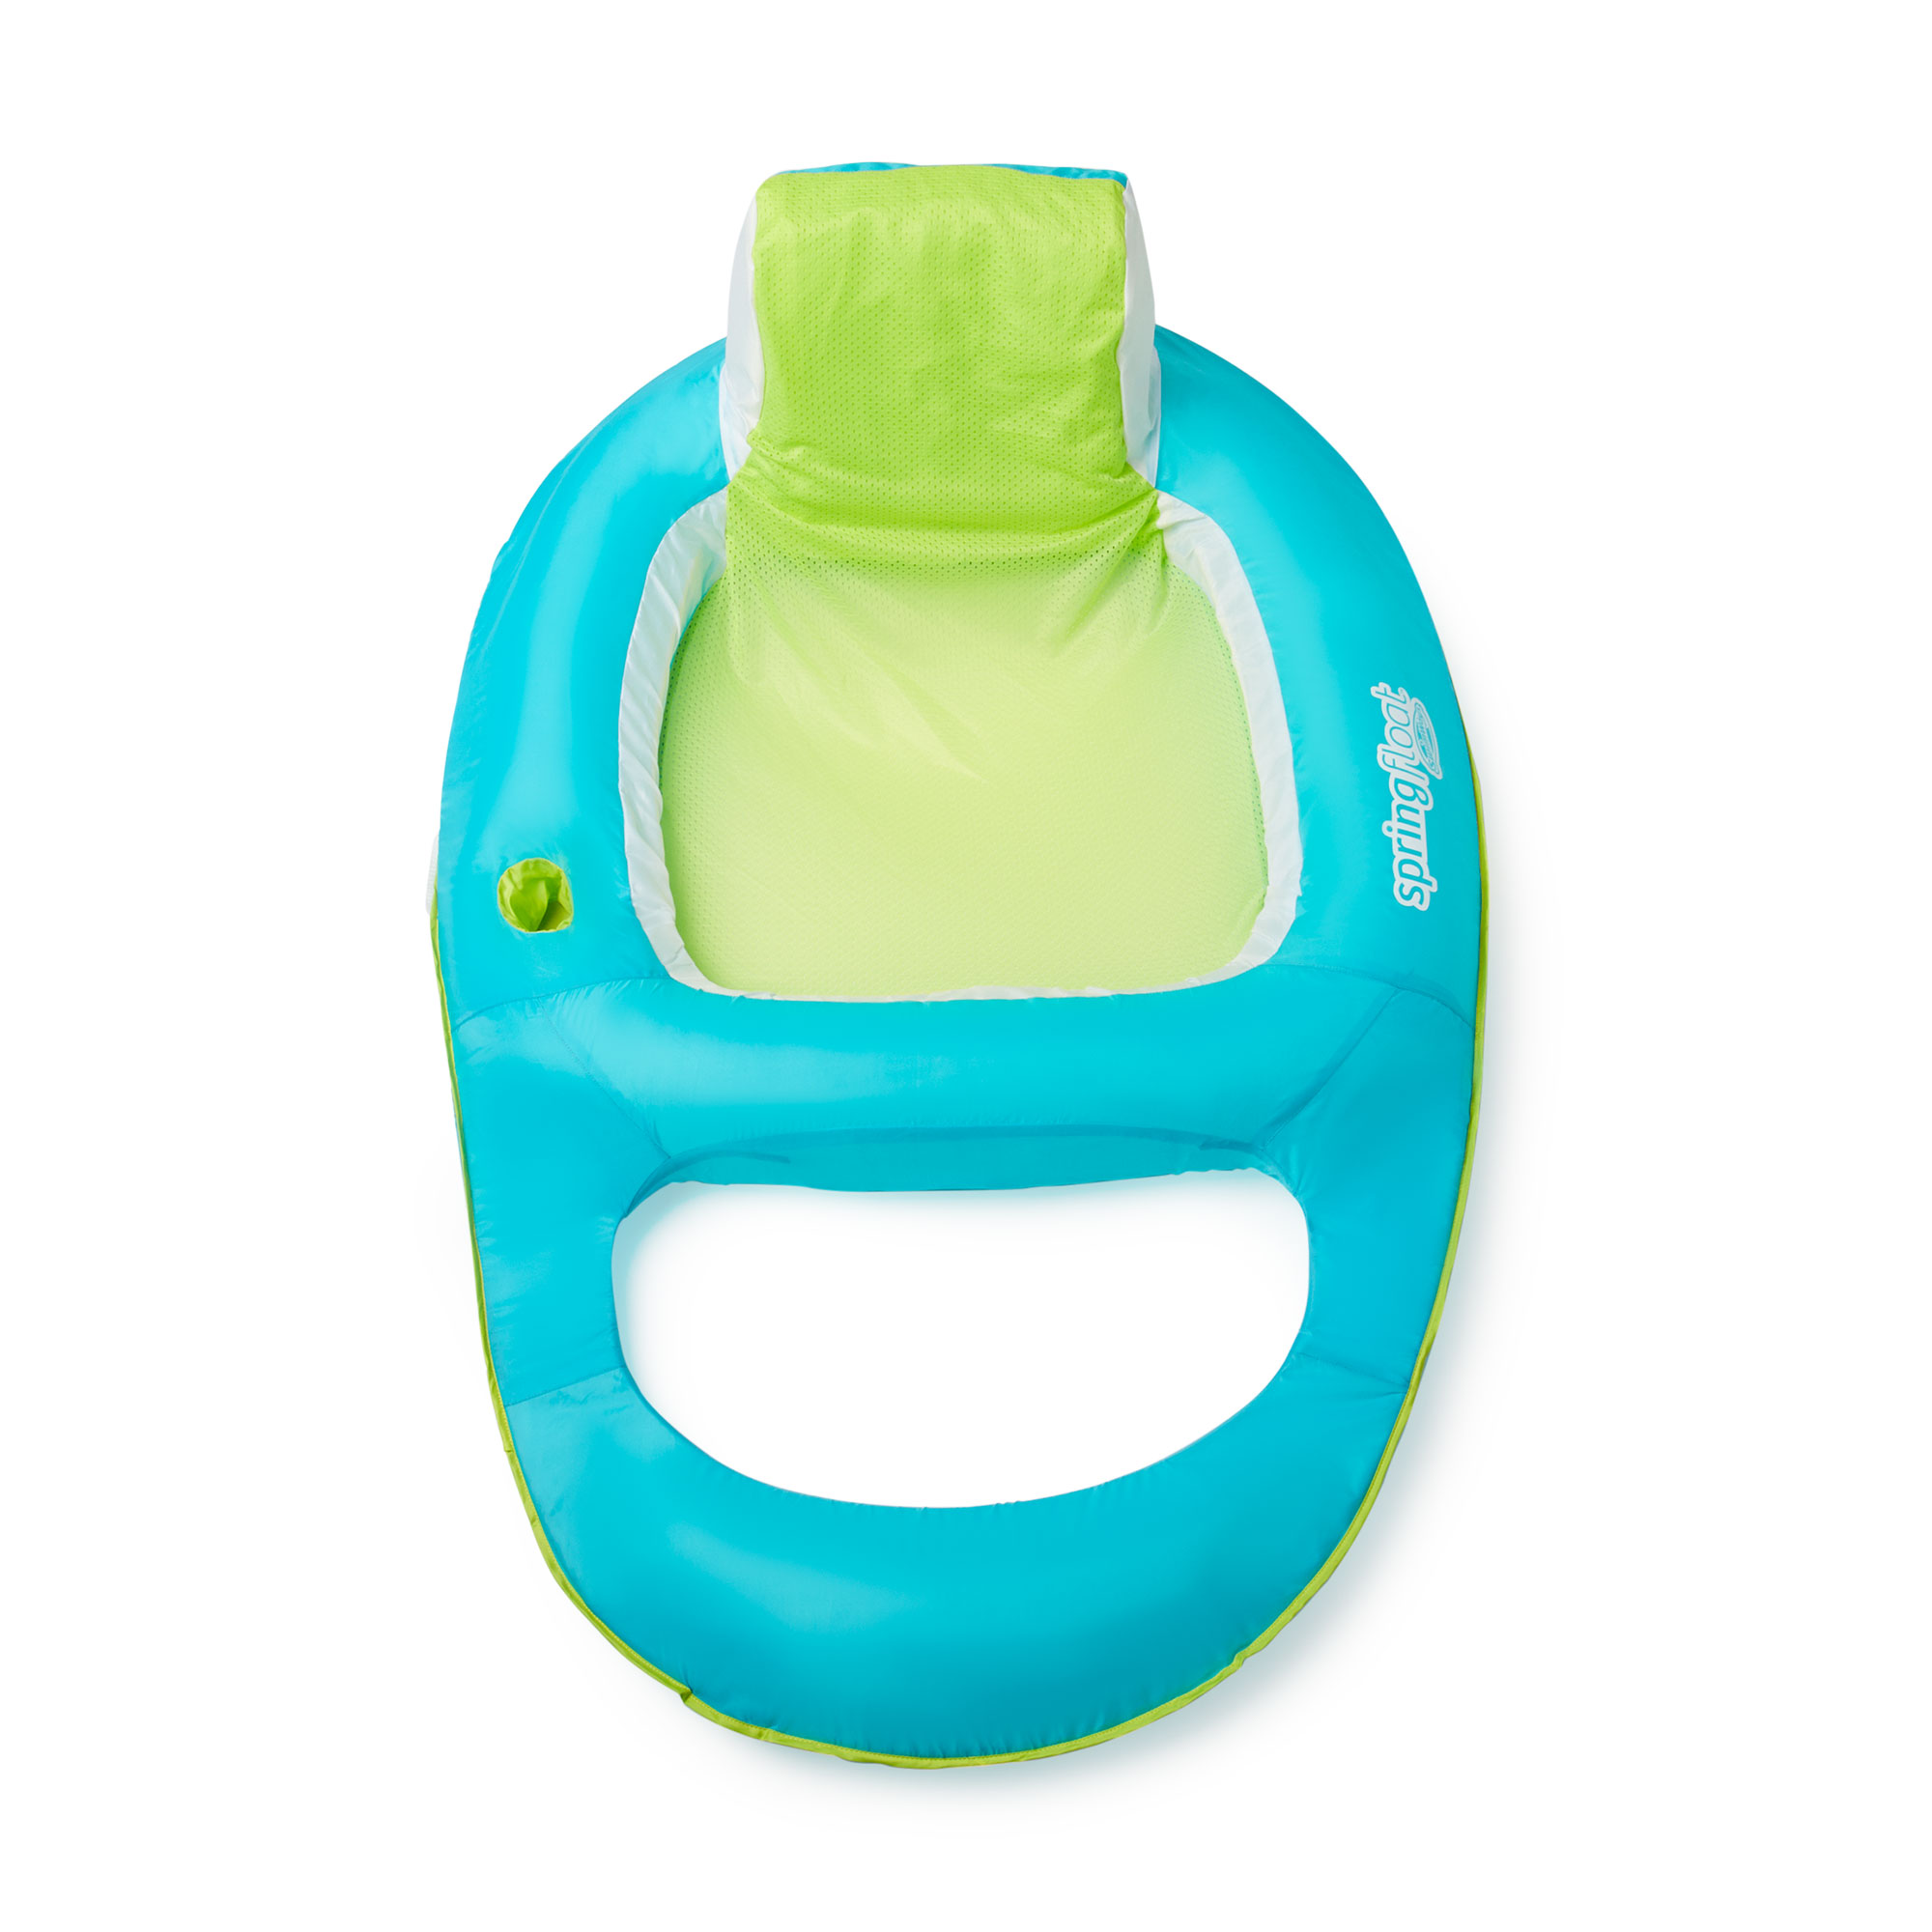 SwimWays Spring Float Swimming Pool Lounger Chaise Inflatable Floating Chair w/Cup Holder, Aqua & Lime - image 4 of 9